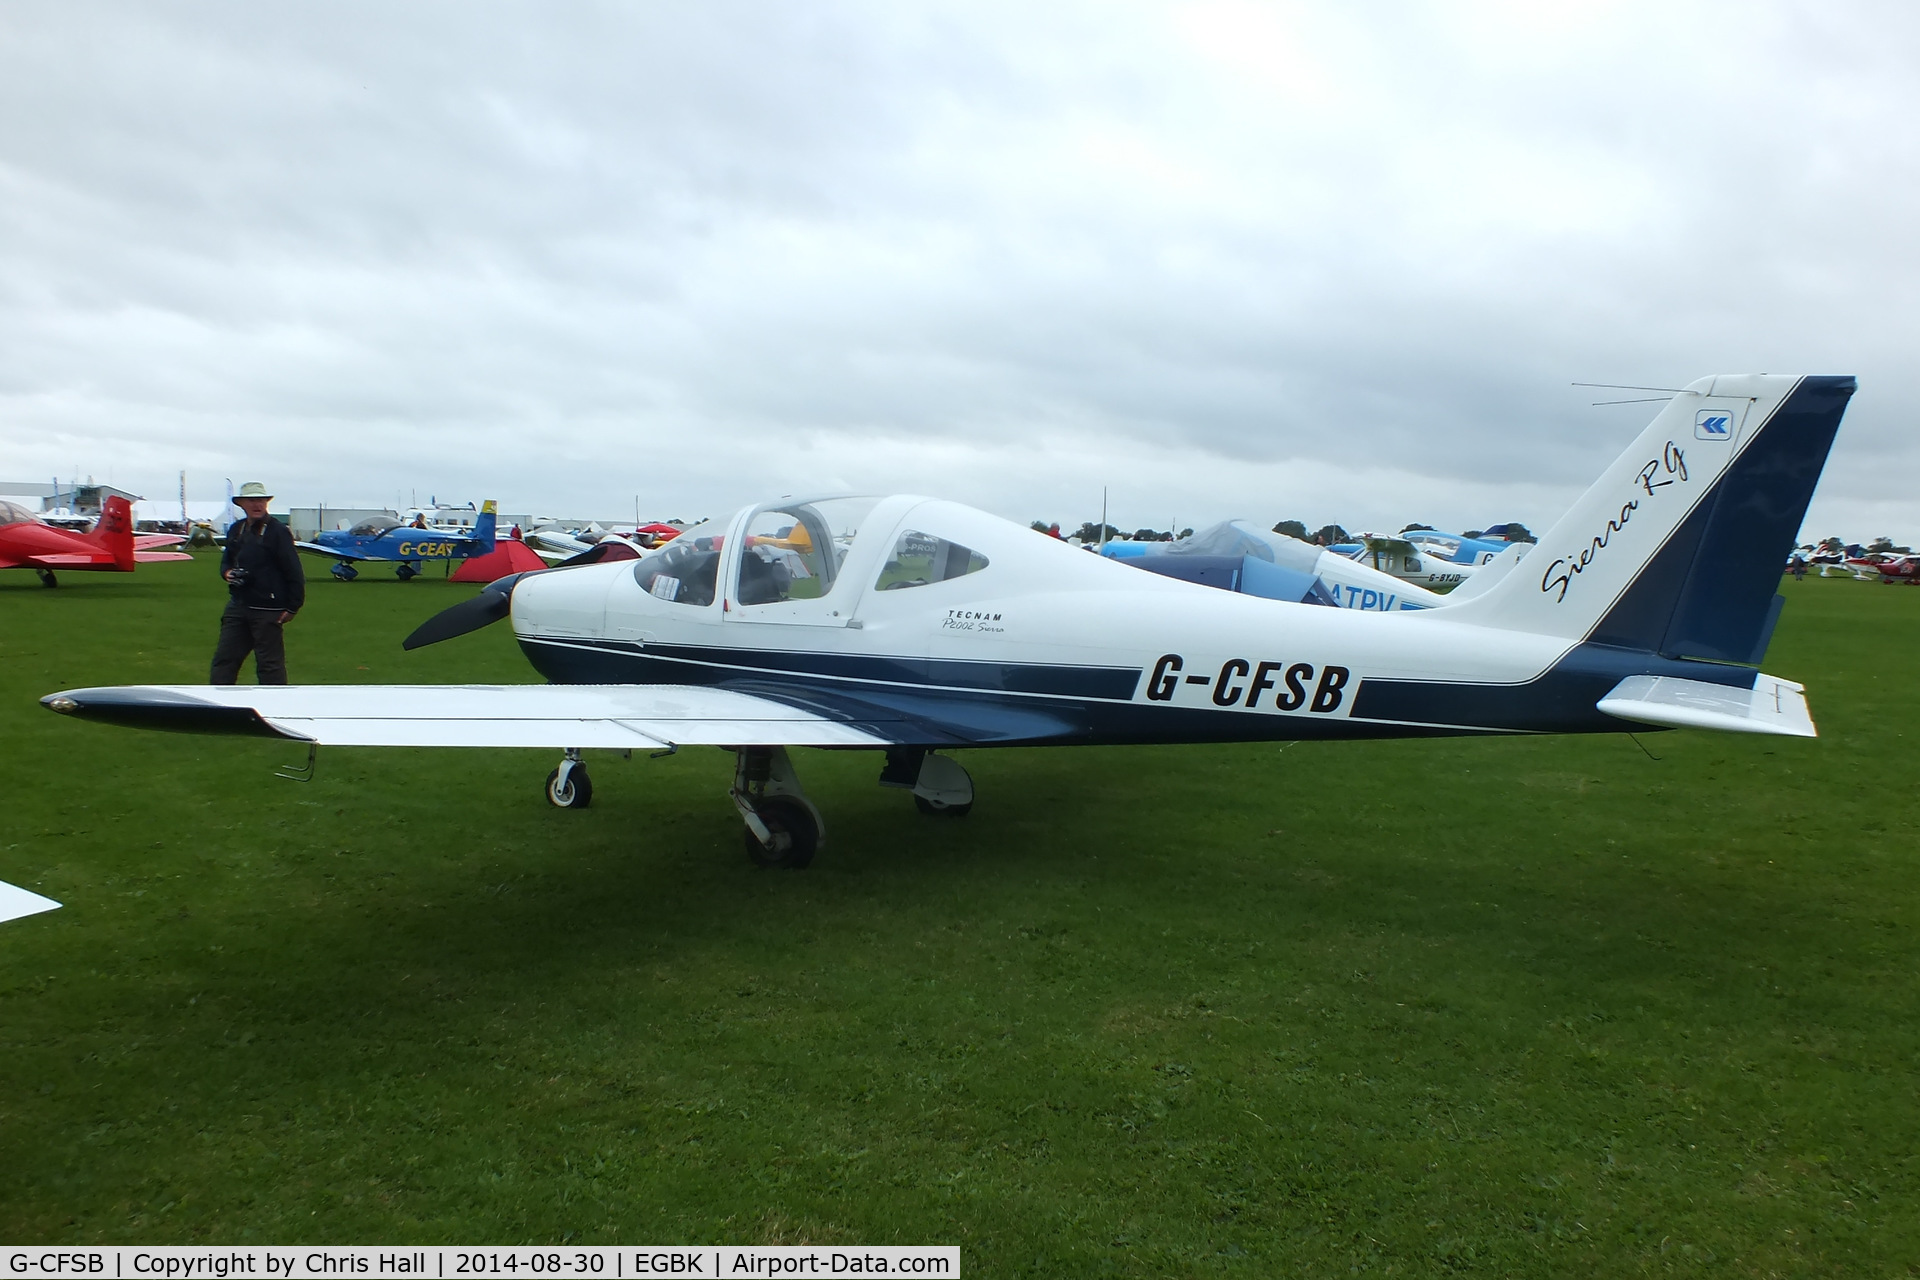 G-CFSB, 2008 Tecnam P-2002RG Sierra C/N LAA 333A-14864, at the LAA Rally 2014, Sywell